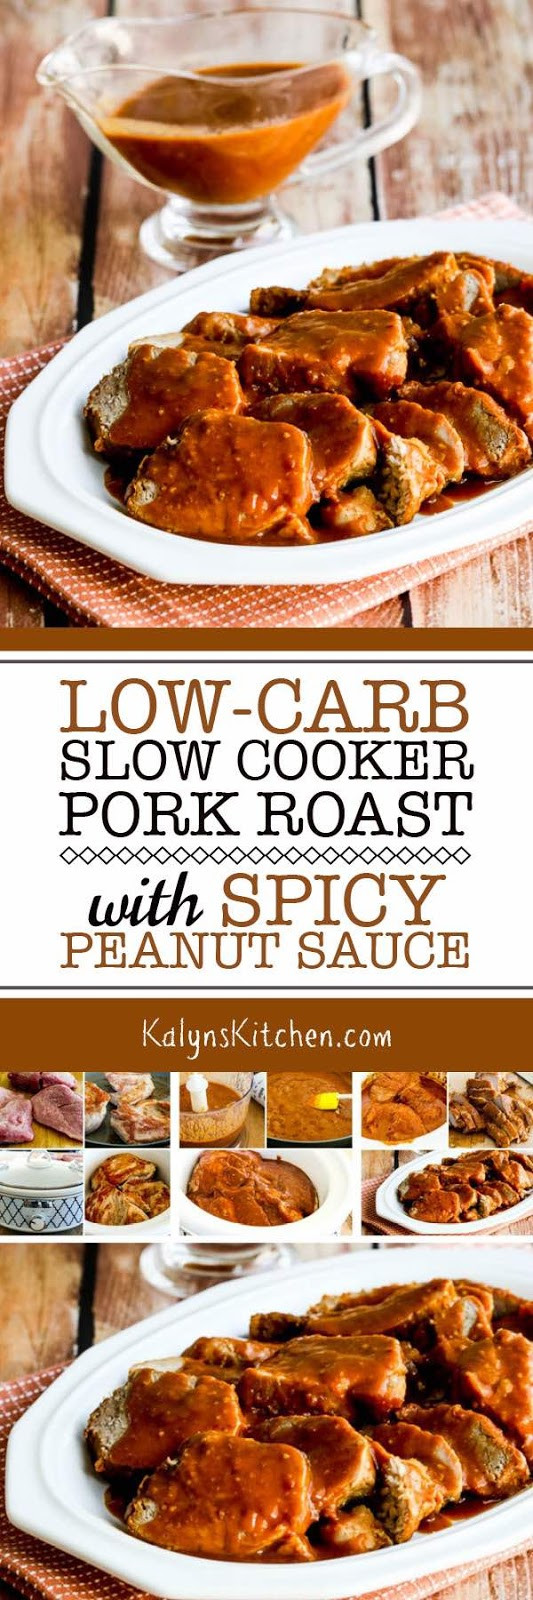 Low Carb Pressure Cooker Recipes
 Low Carb Slow Cooker or Pressure Cooker Pork Roast with